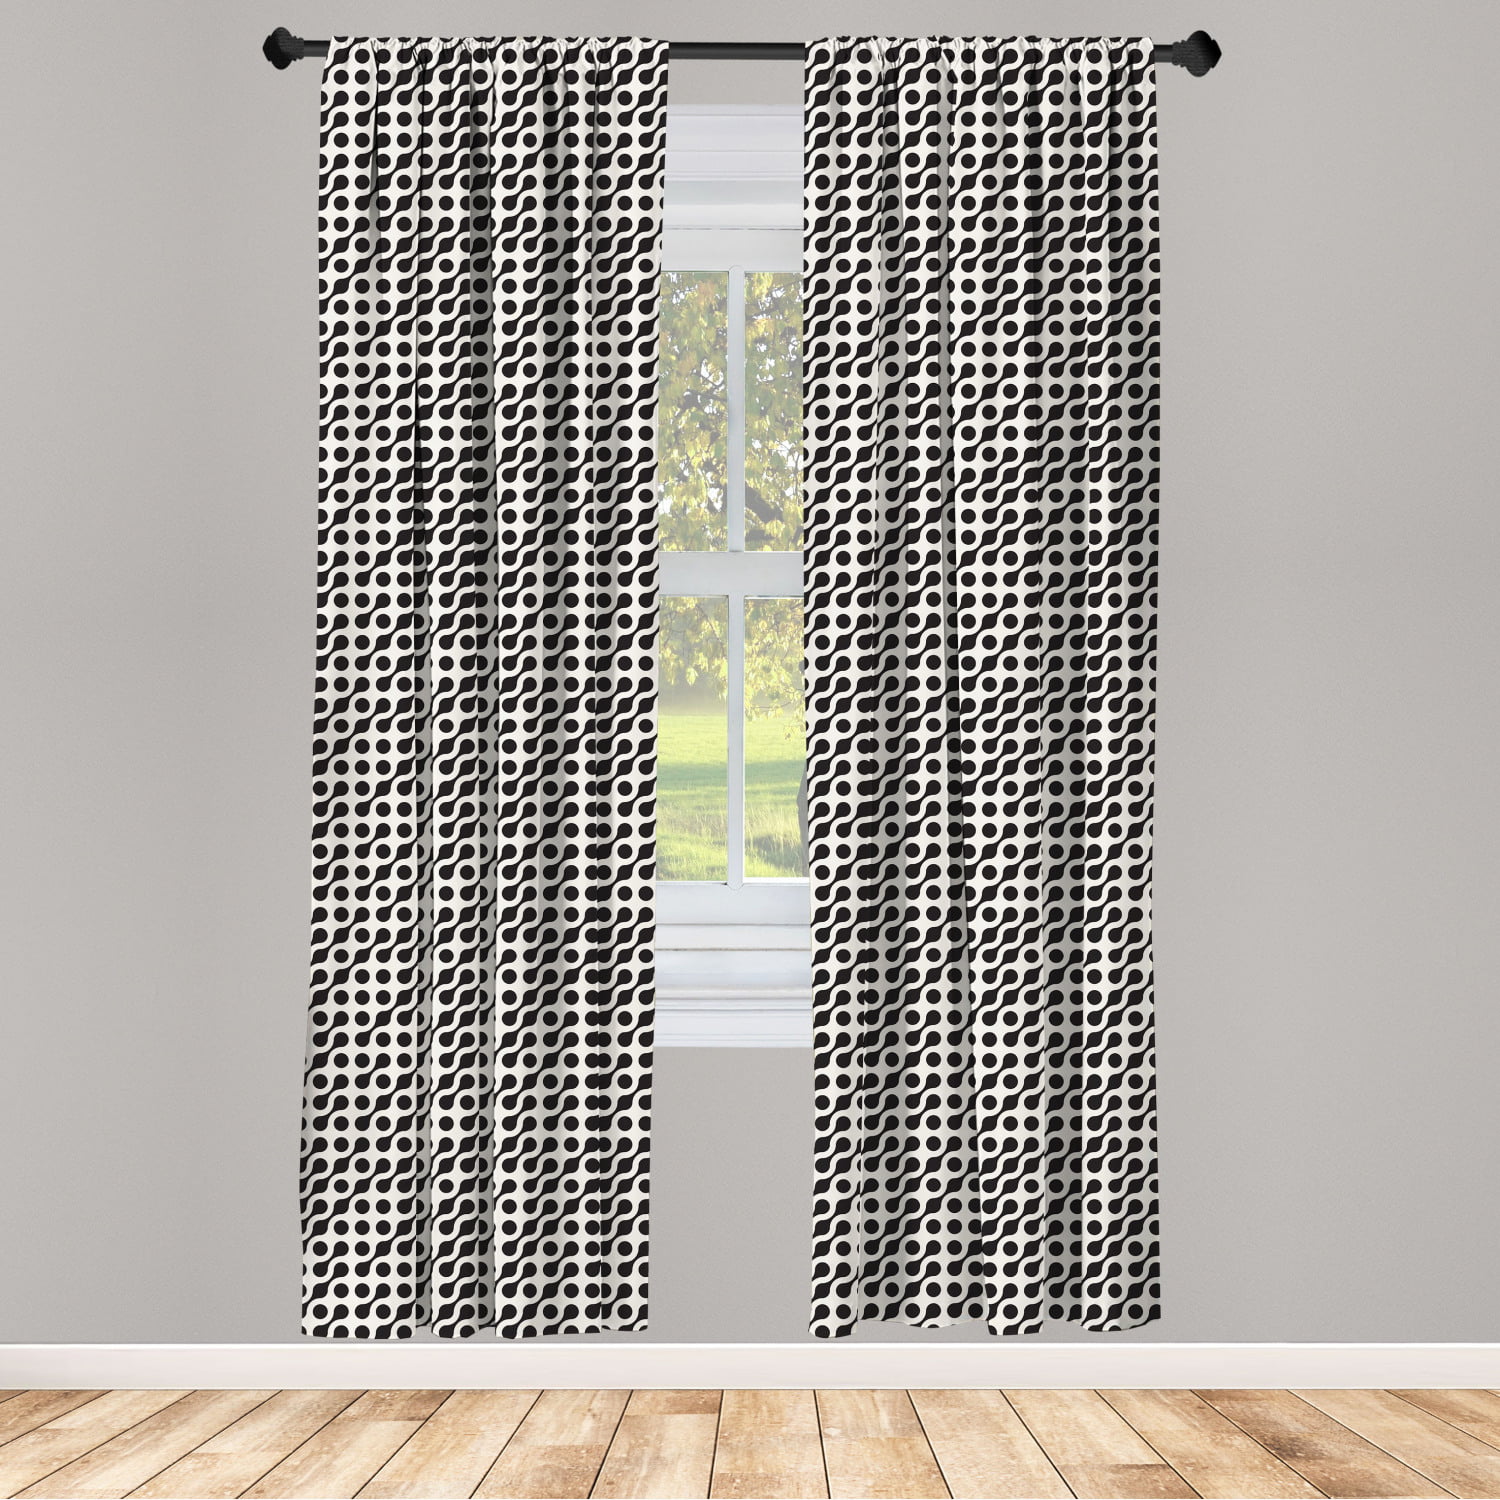 Humor Curtains 2 Panels Set, Stickman Meme Face Icon Looking at Computer  Joyful Fun Caricature Comic Design, Window Drapes for Living Room Bedroom,  108W X 63L Inches, Black and White, by Ambesonne 